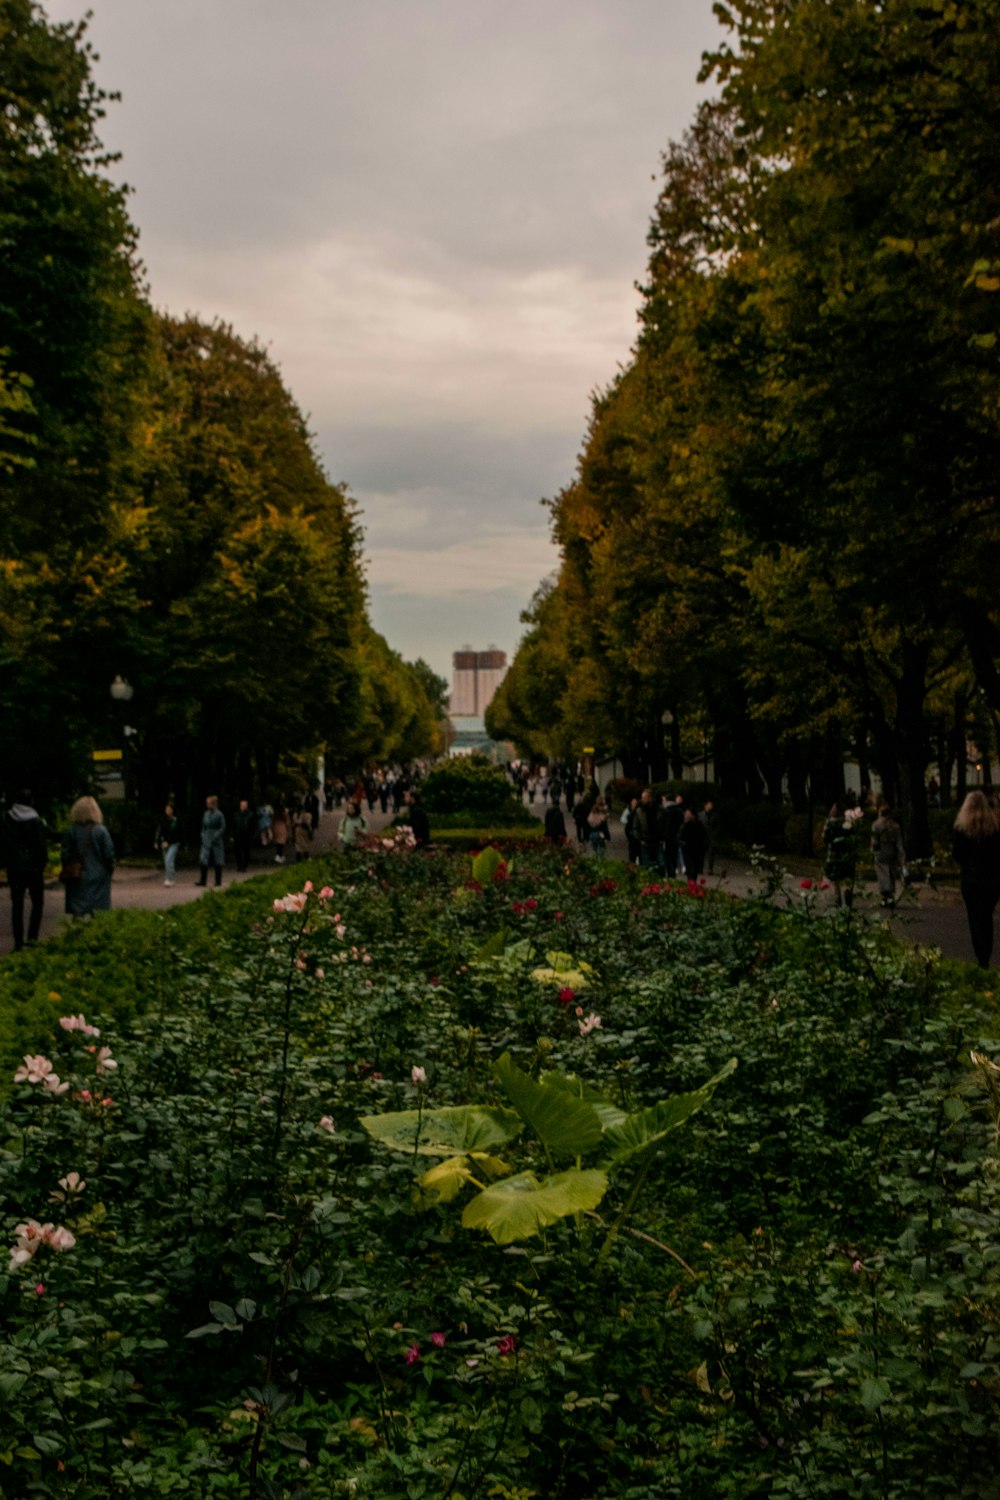 a group of people walking in a park with flowers and trees